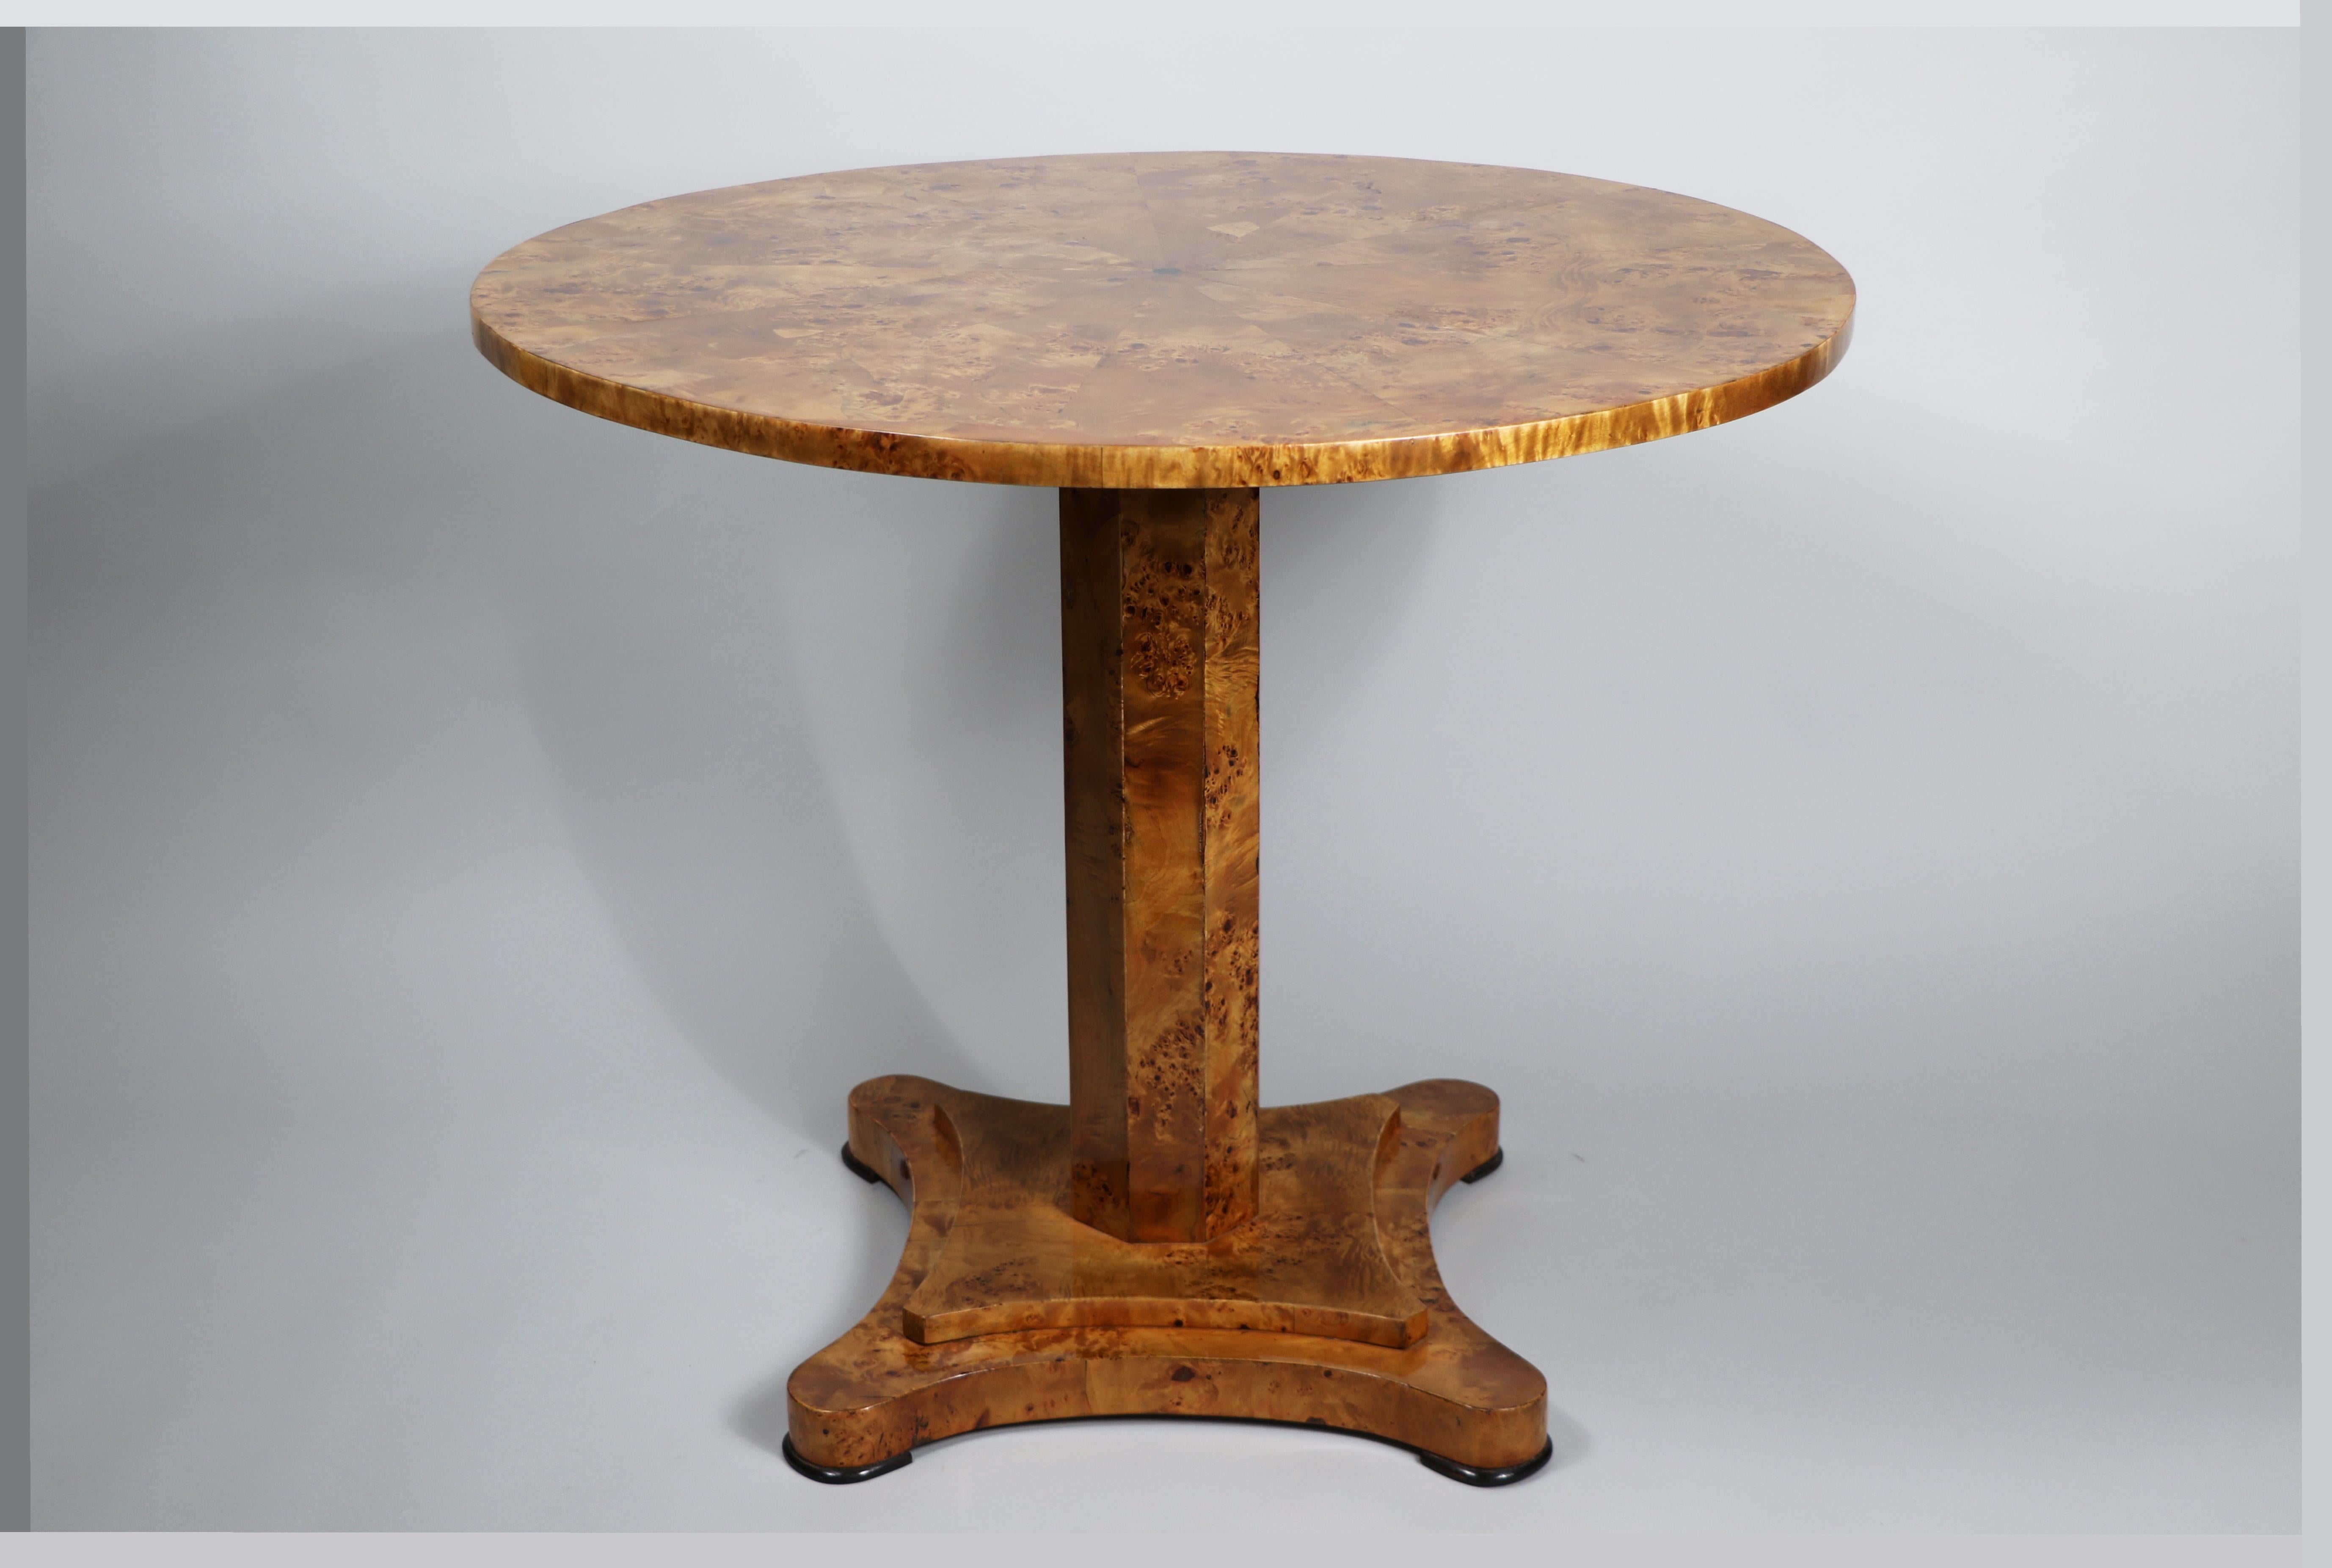 Hello,

This elegant Biedermeier birch pedestal table is the best example of high quality Austrian piece from circa 1830.

Austrian Biedermeier is distinguished by their sophisticated proportions, rare and refined design and excellent craftsmanship